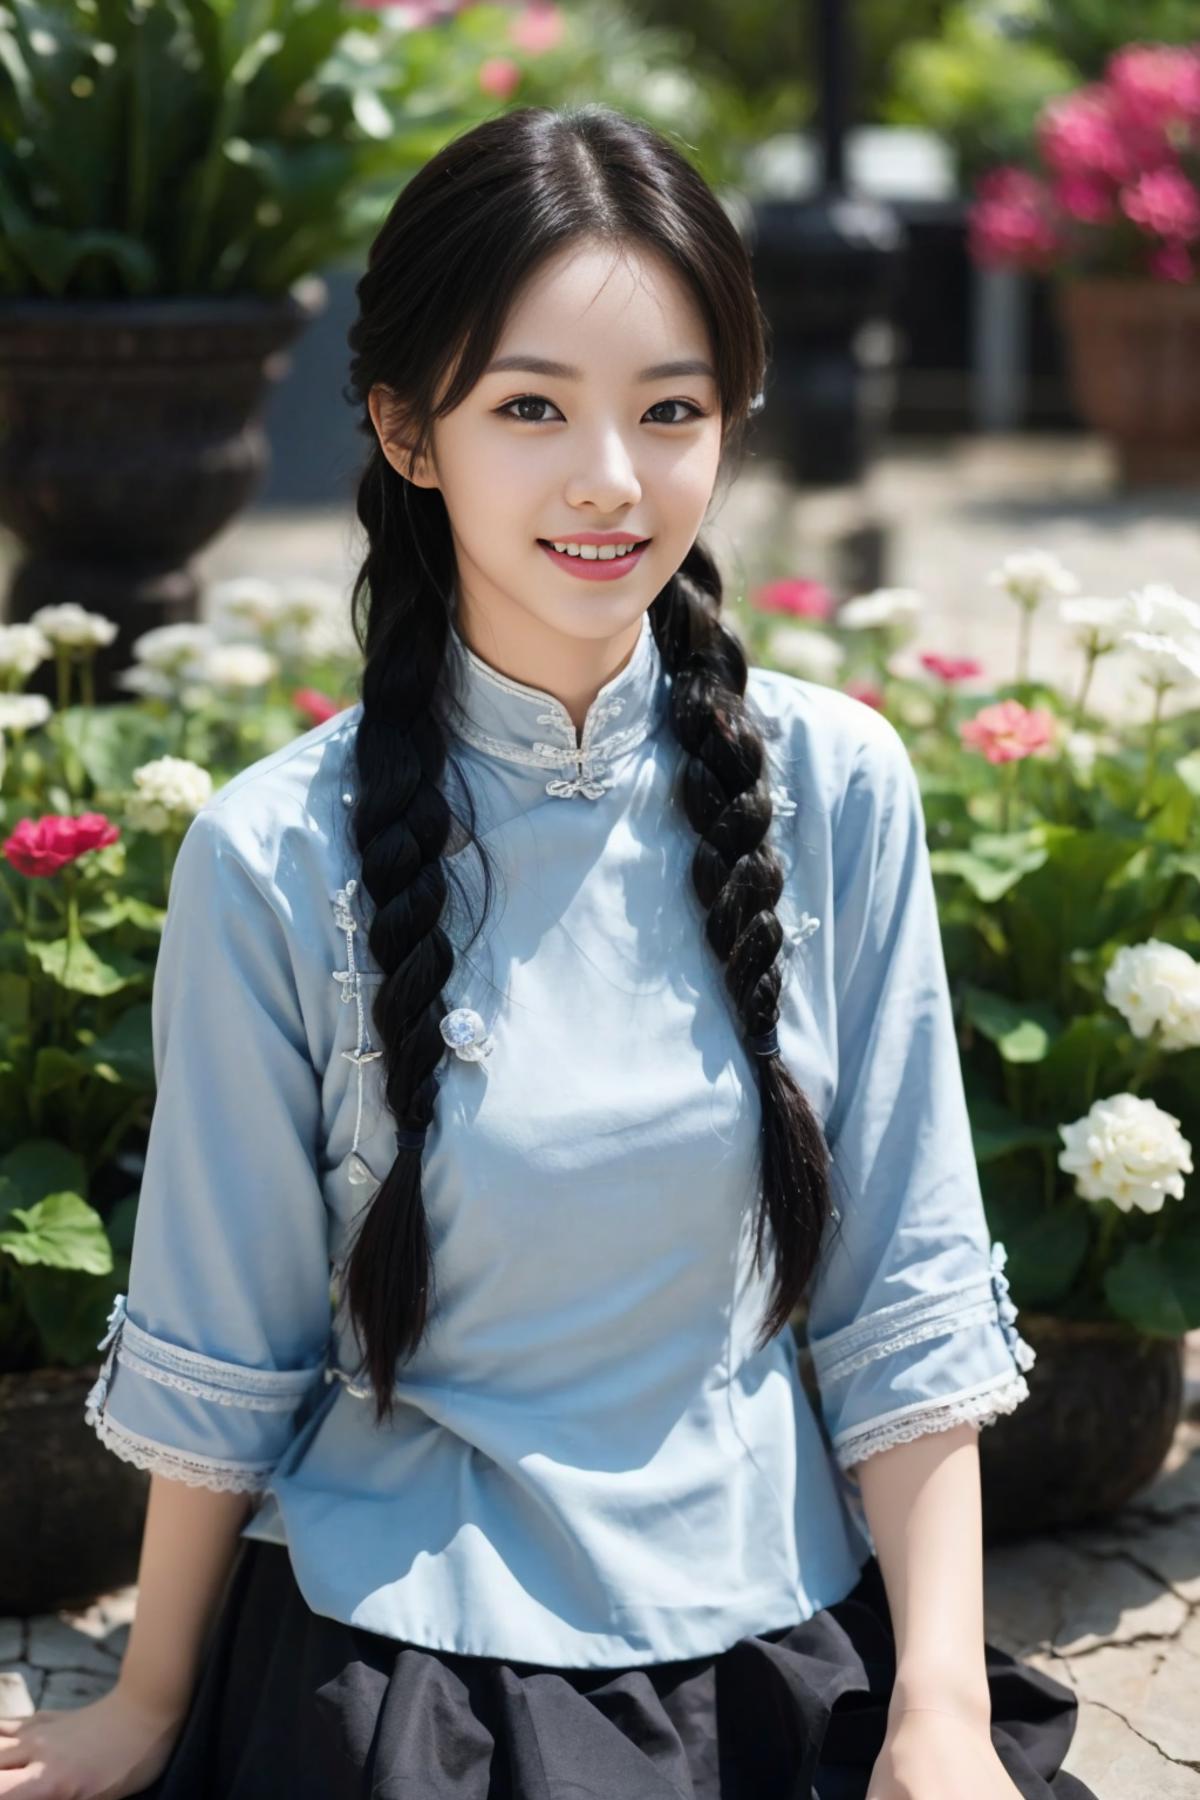 China Republican period female student uniform image by southhoop